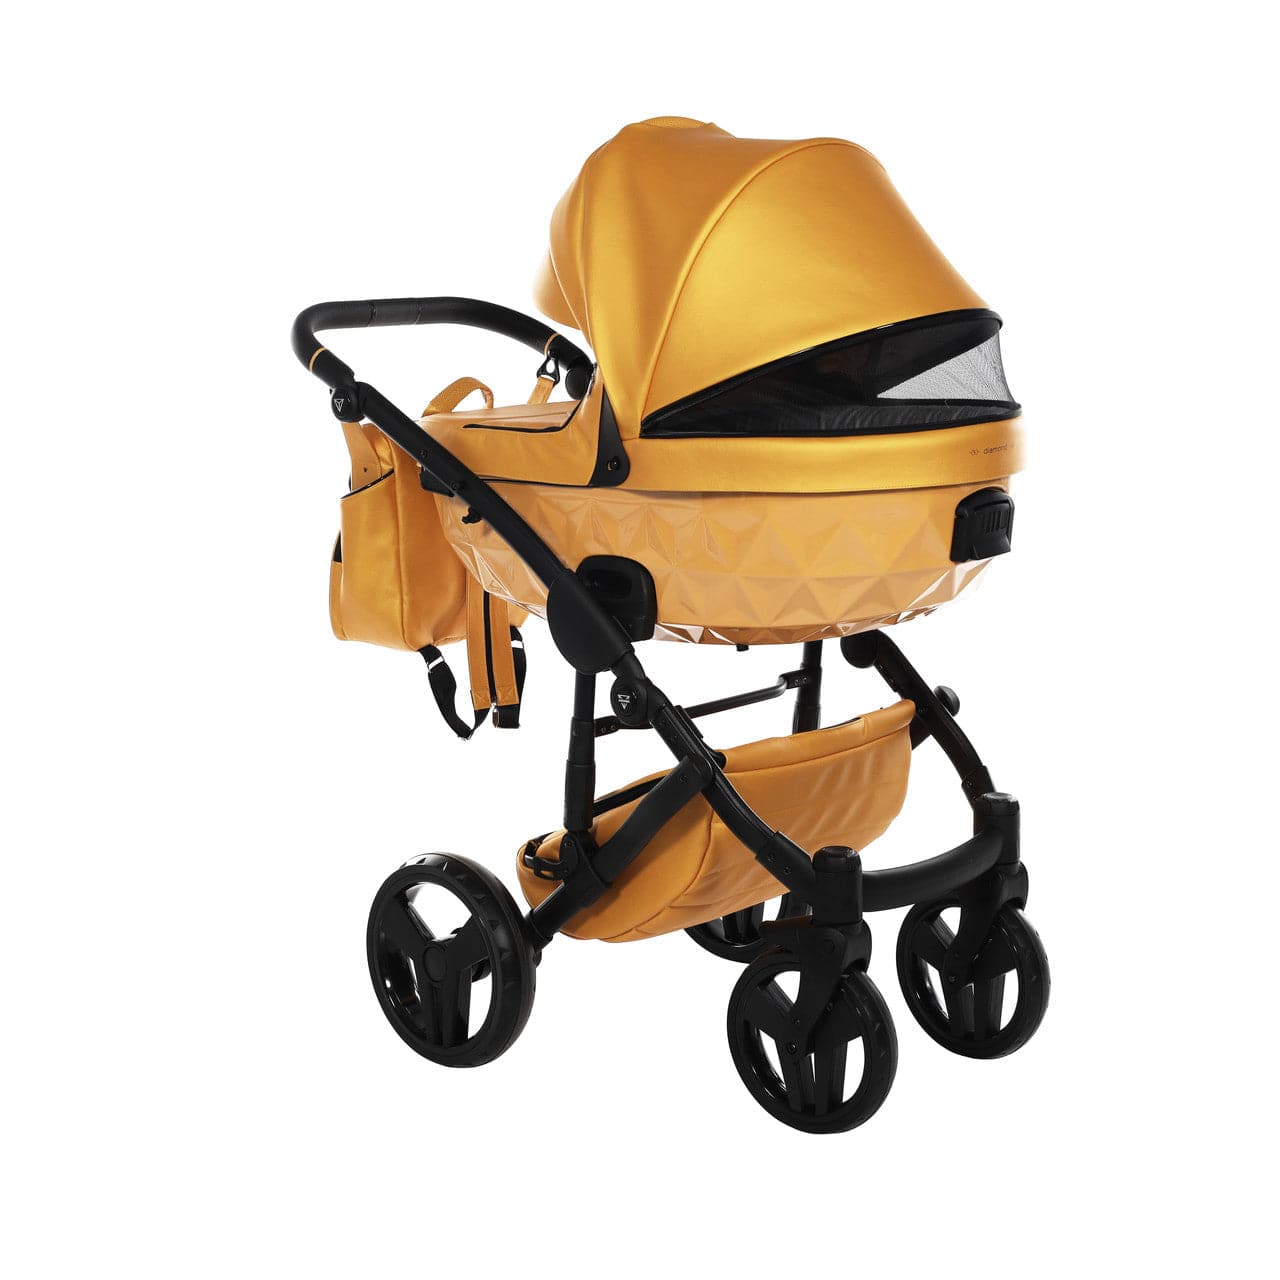 Junama S-Class 3 In 1 Travel System - Yellow - For Your Little One